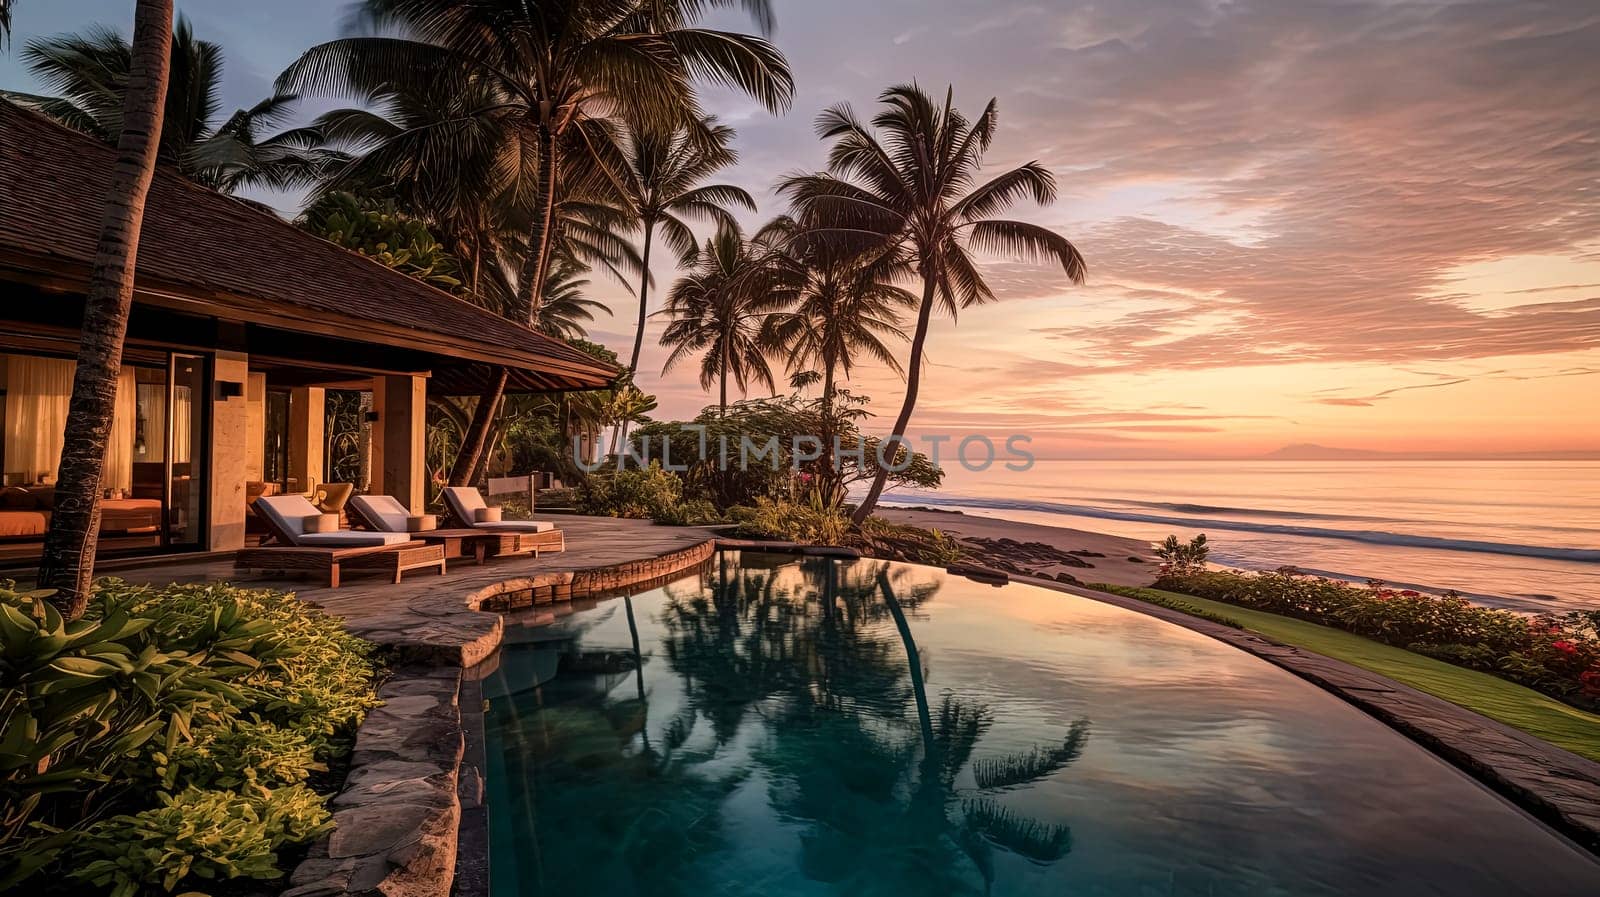 A beautiful beach scene with a house in the background. The house is surrounded by palm trees and the water is calm. The sky is orange and pink, creating a warm and inviting atmosphere